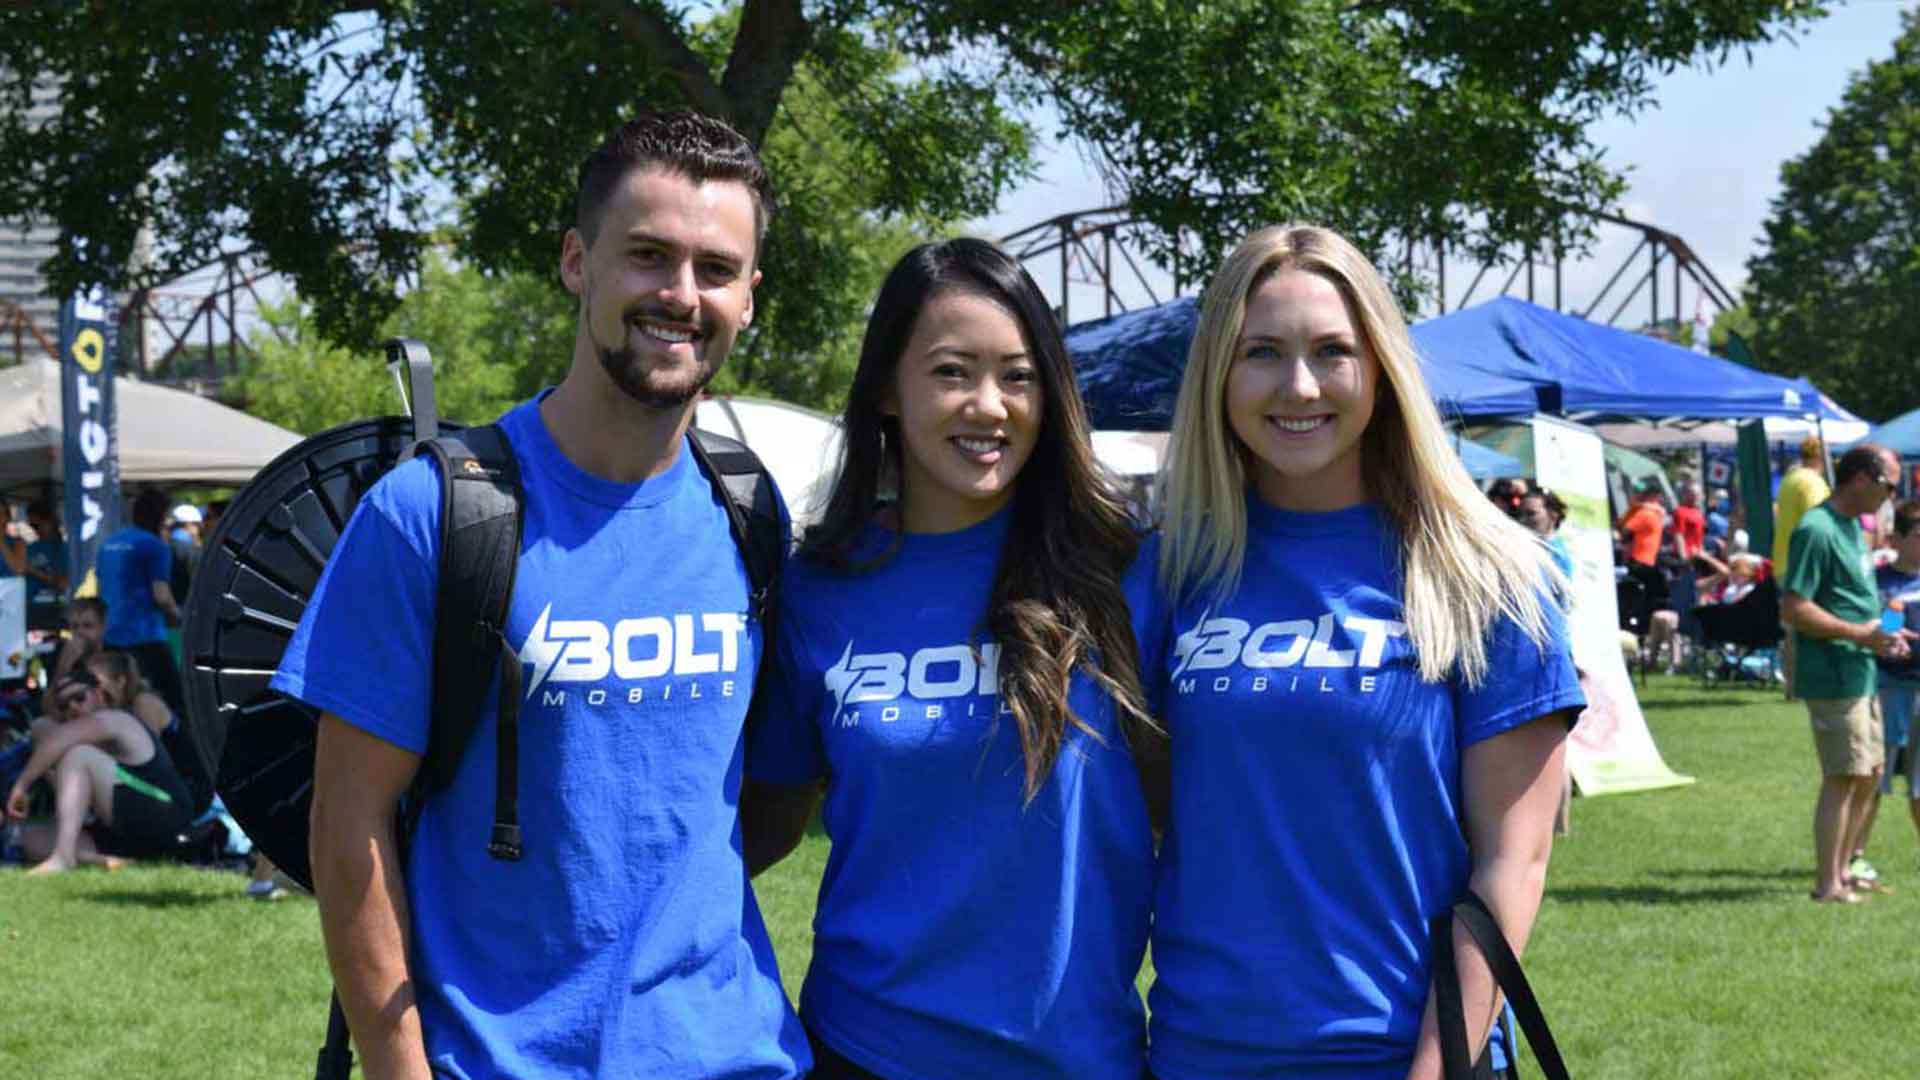 Three Bolt Mobile brand ambassadors wearing blue shirts posing for a picture at community event in the summer